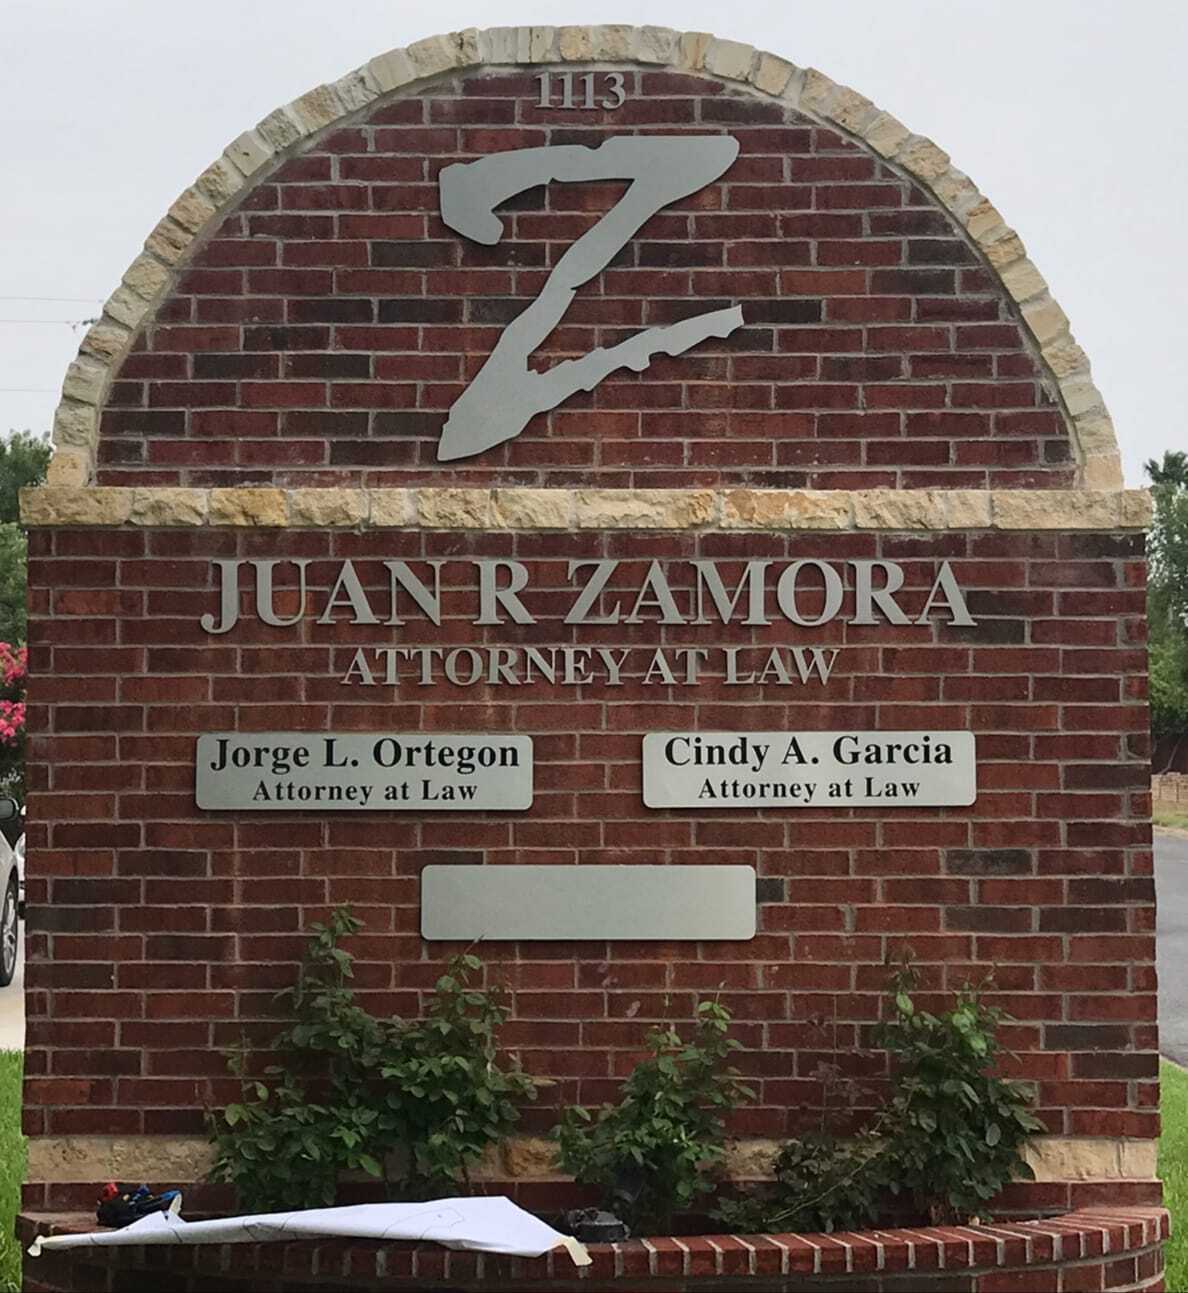 The Law Office Of Juan R. Zamora  With a proven track record spanning more than 14 years, the renowned personal injury law firm has helped several injured people and their families in McAllen, TX